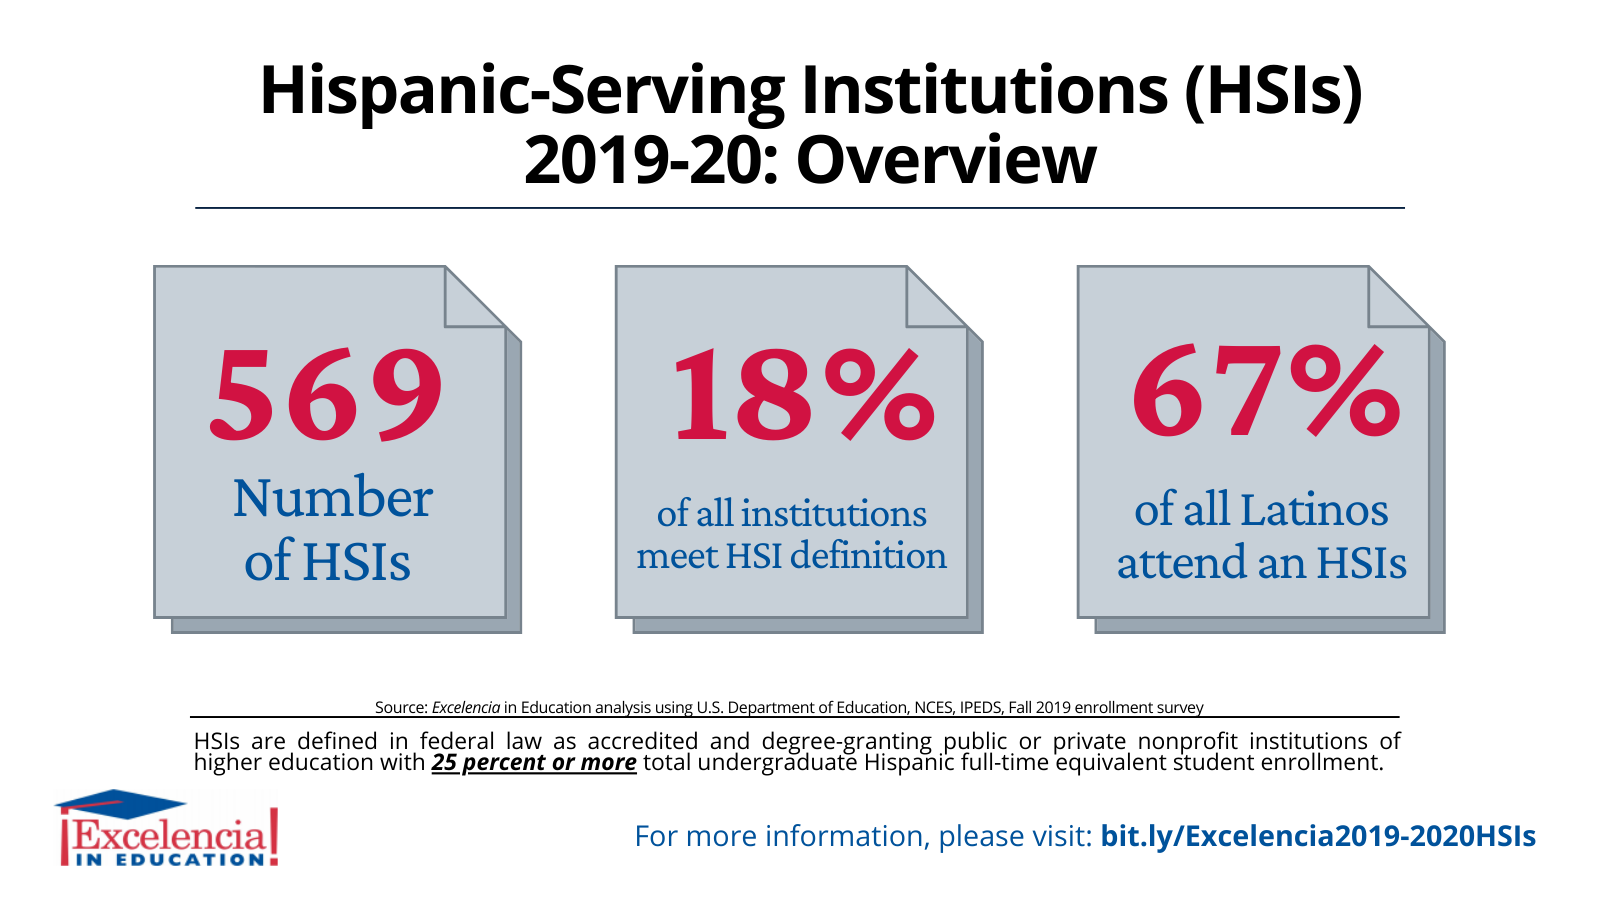 Infographic-Hispanic-Serving Institutions (HSIs) 2019-2020: Overview